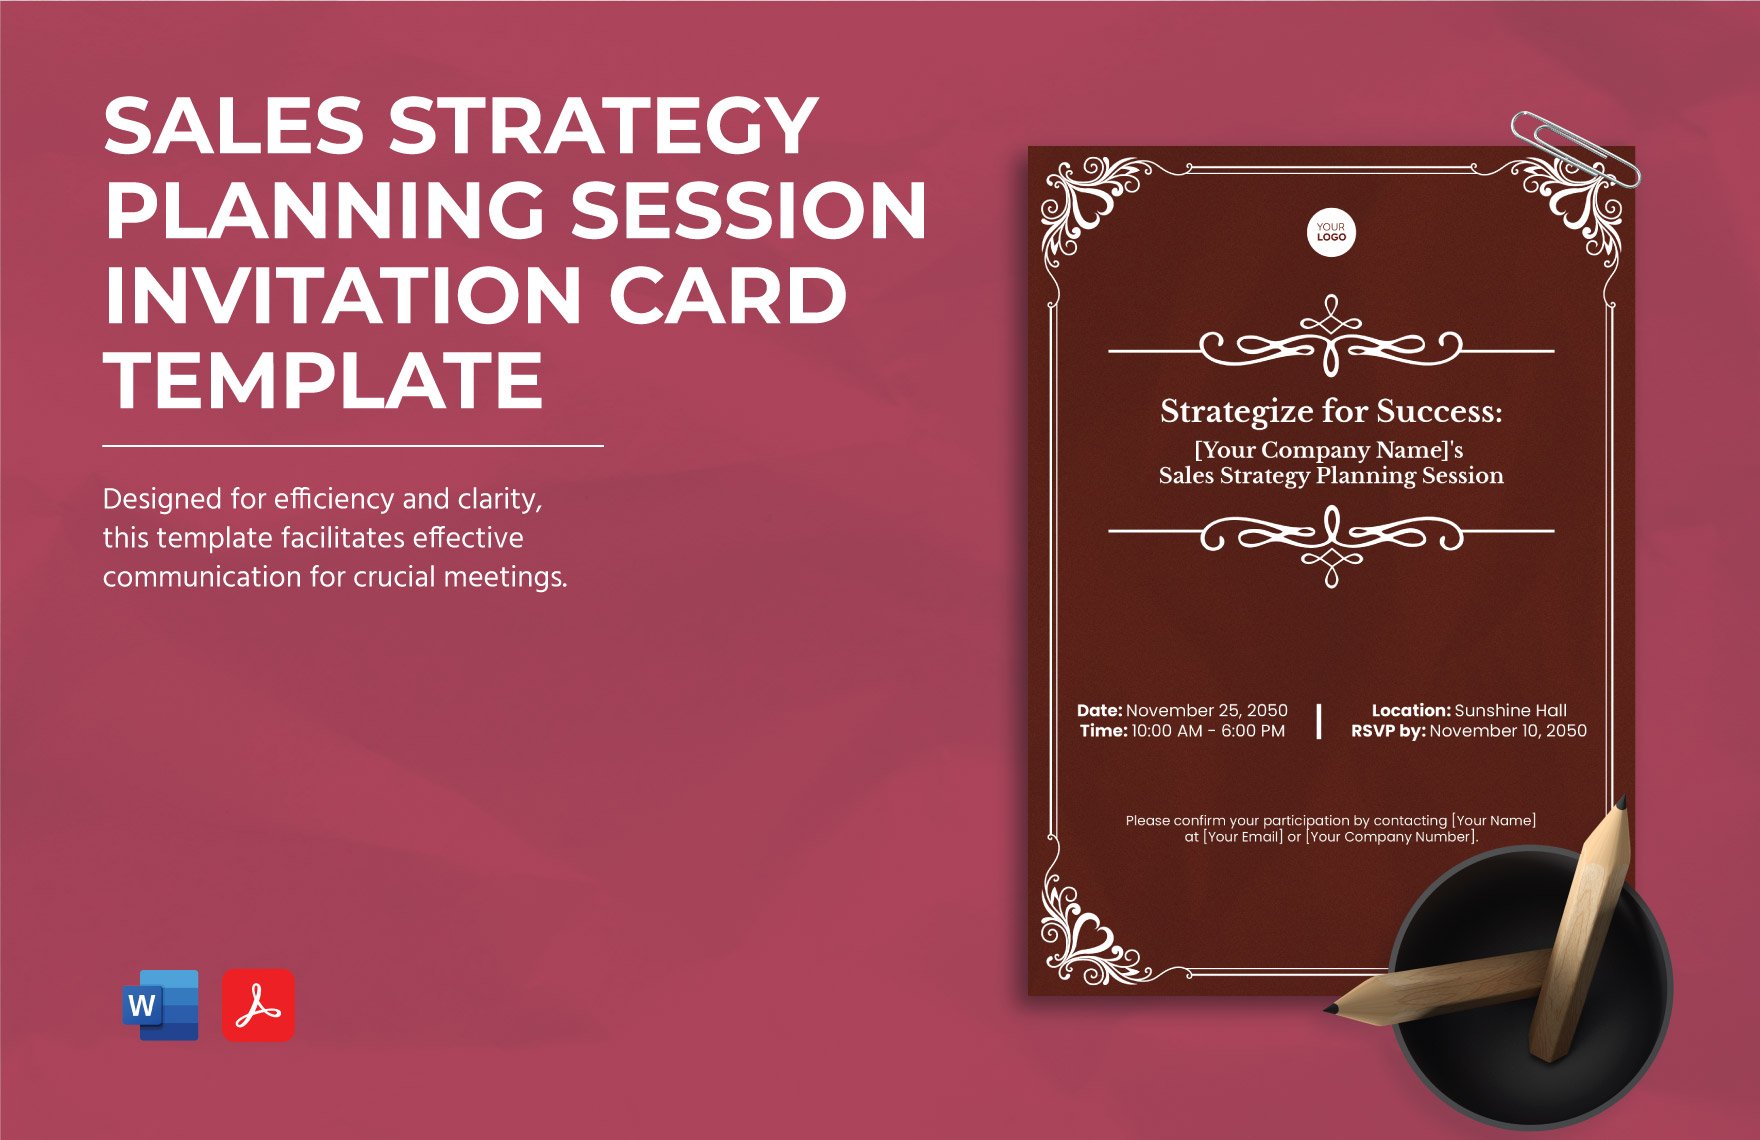 Sales Strategy Planning Session Invitation Card Template